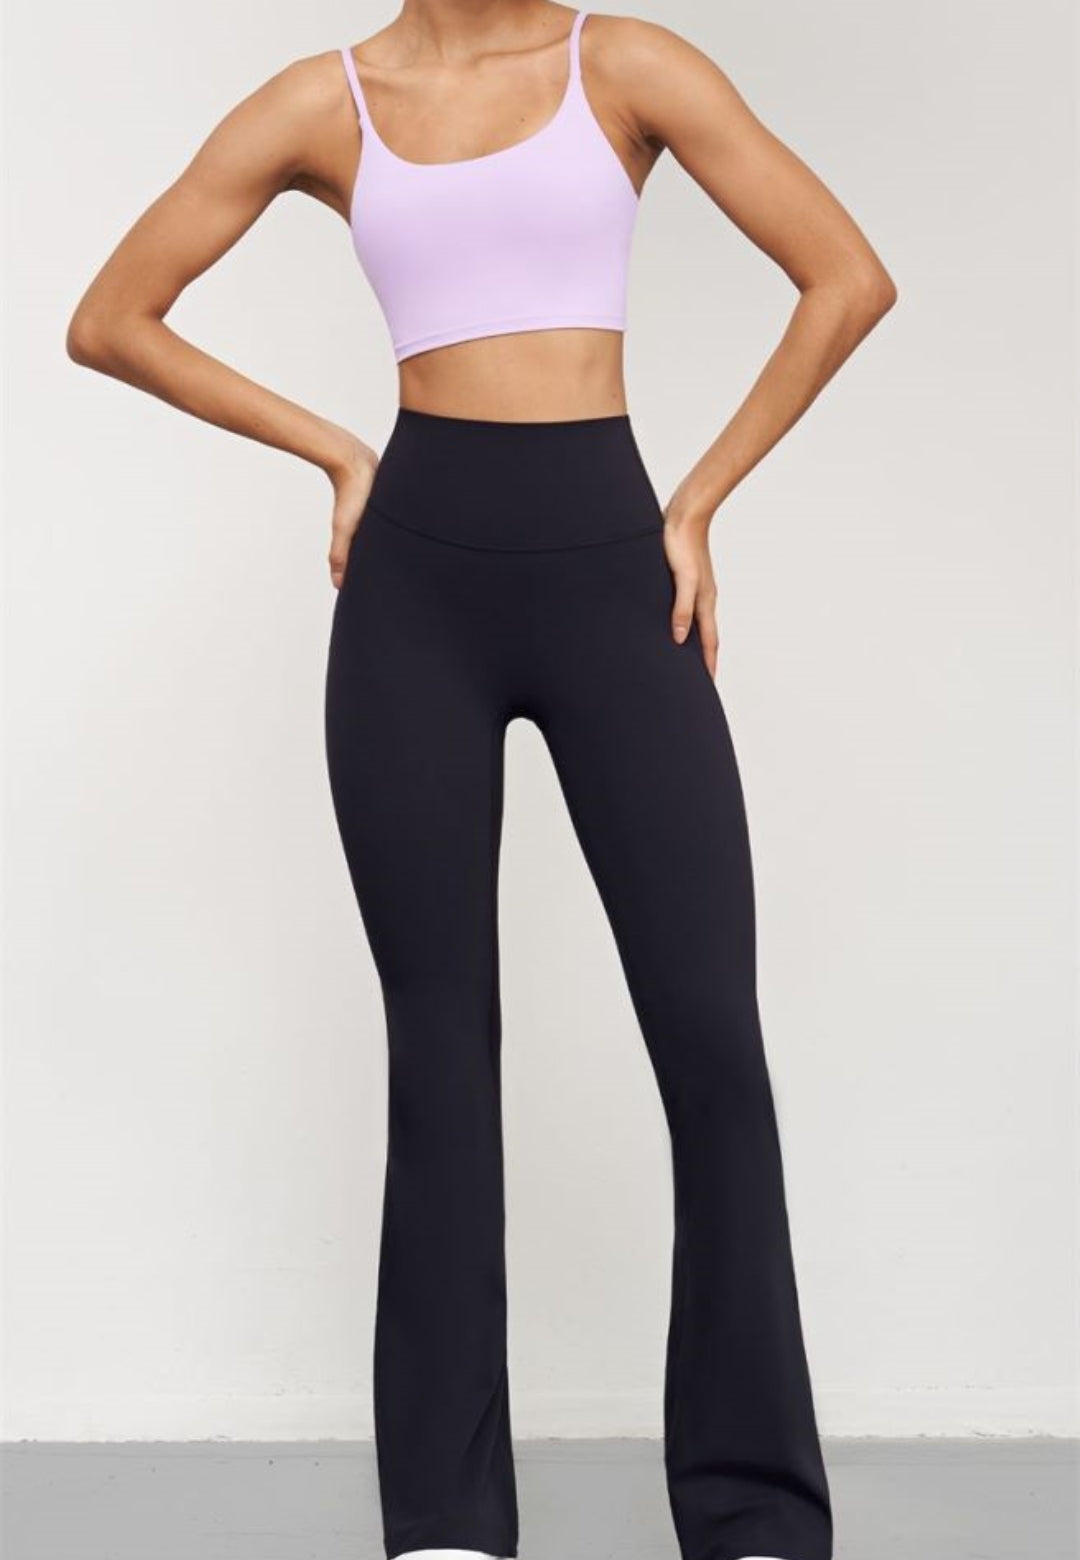 Flare Leggings for Women Classic High Waisted Solid Color Yoga